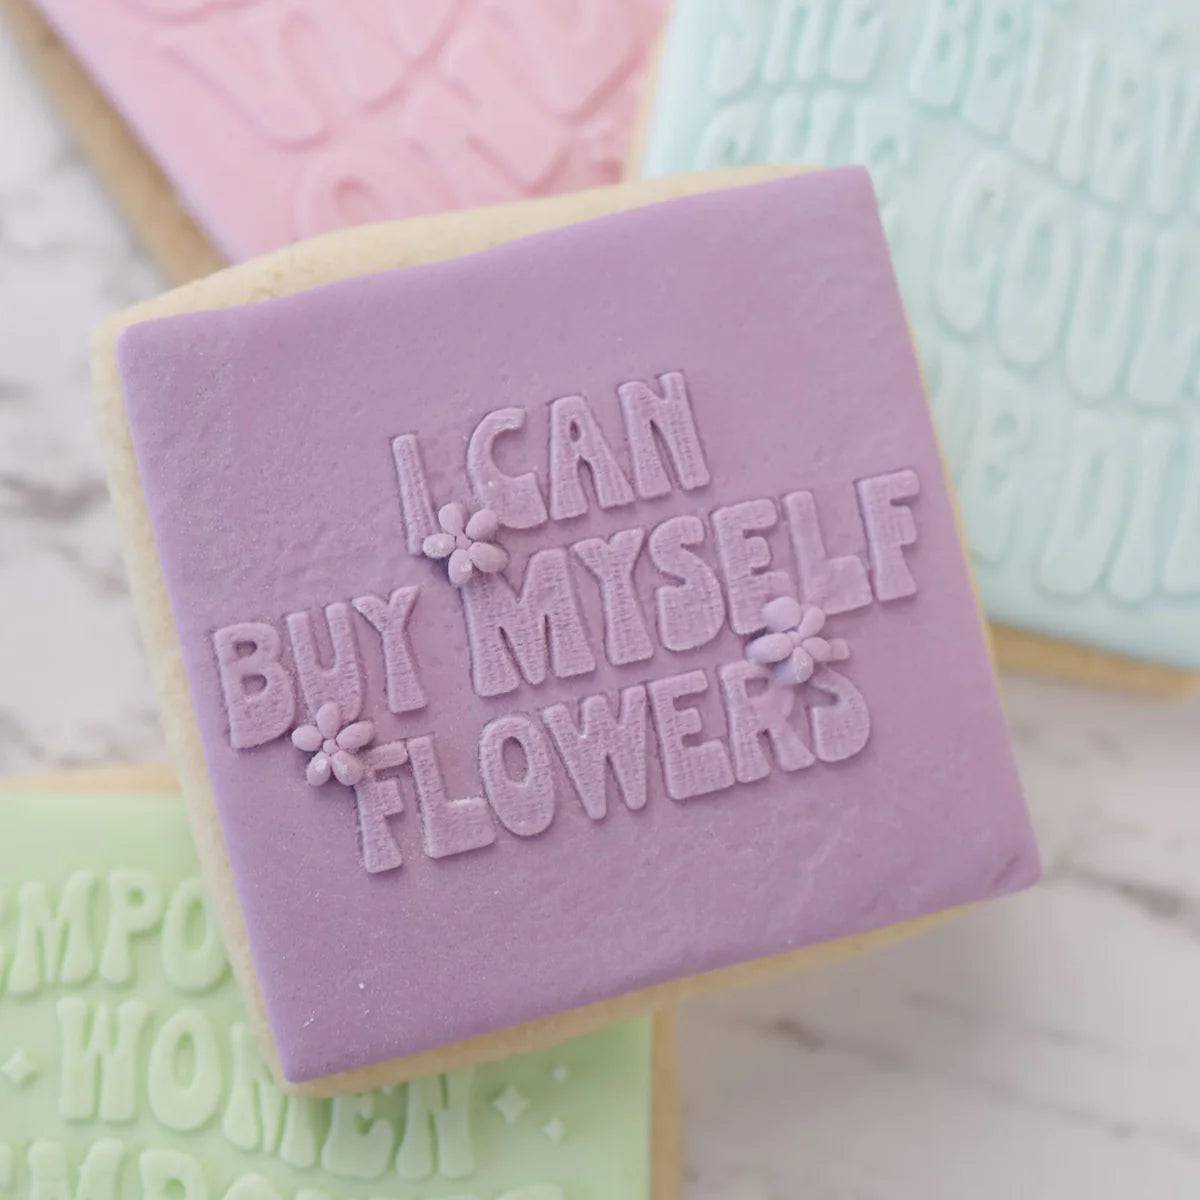 I can buy myself flowers Cookie Stamp Outboss by Sweet Stamp - Der Backmichgluecklich Online Shop